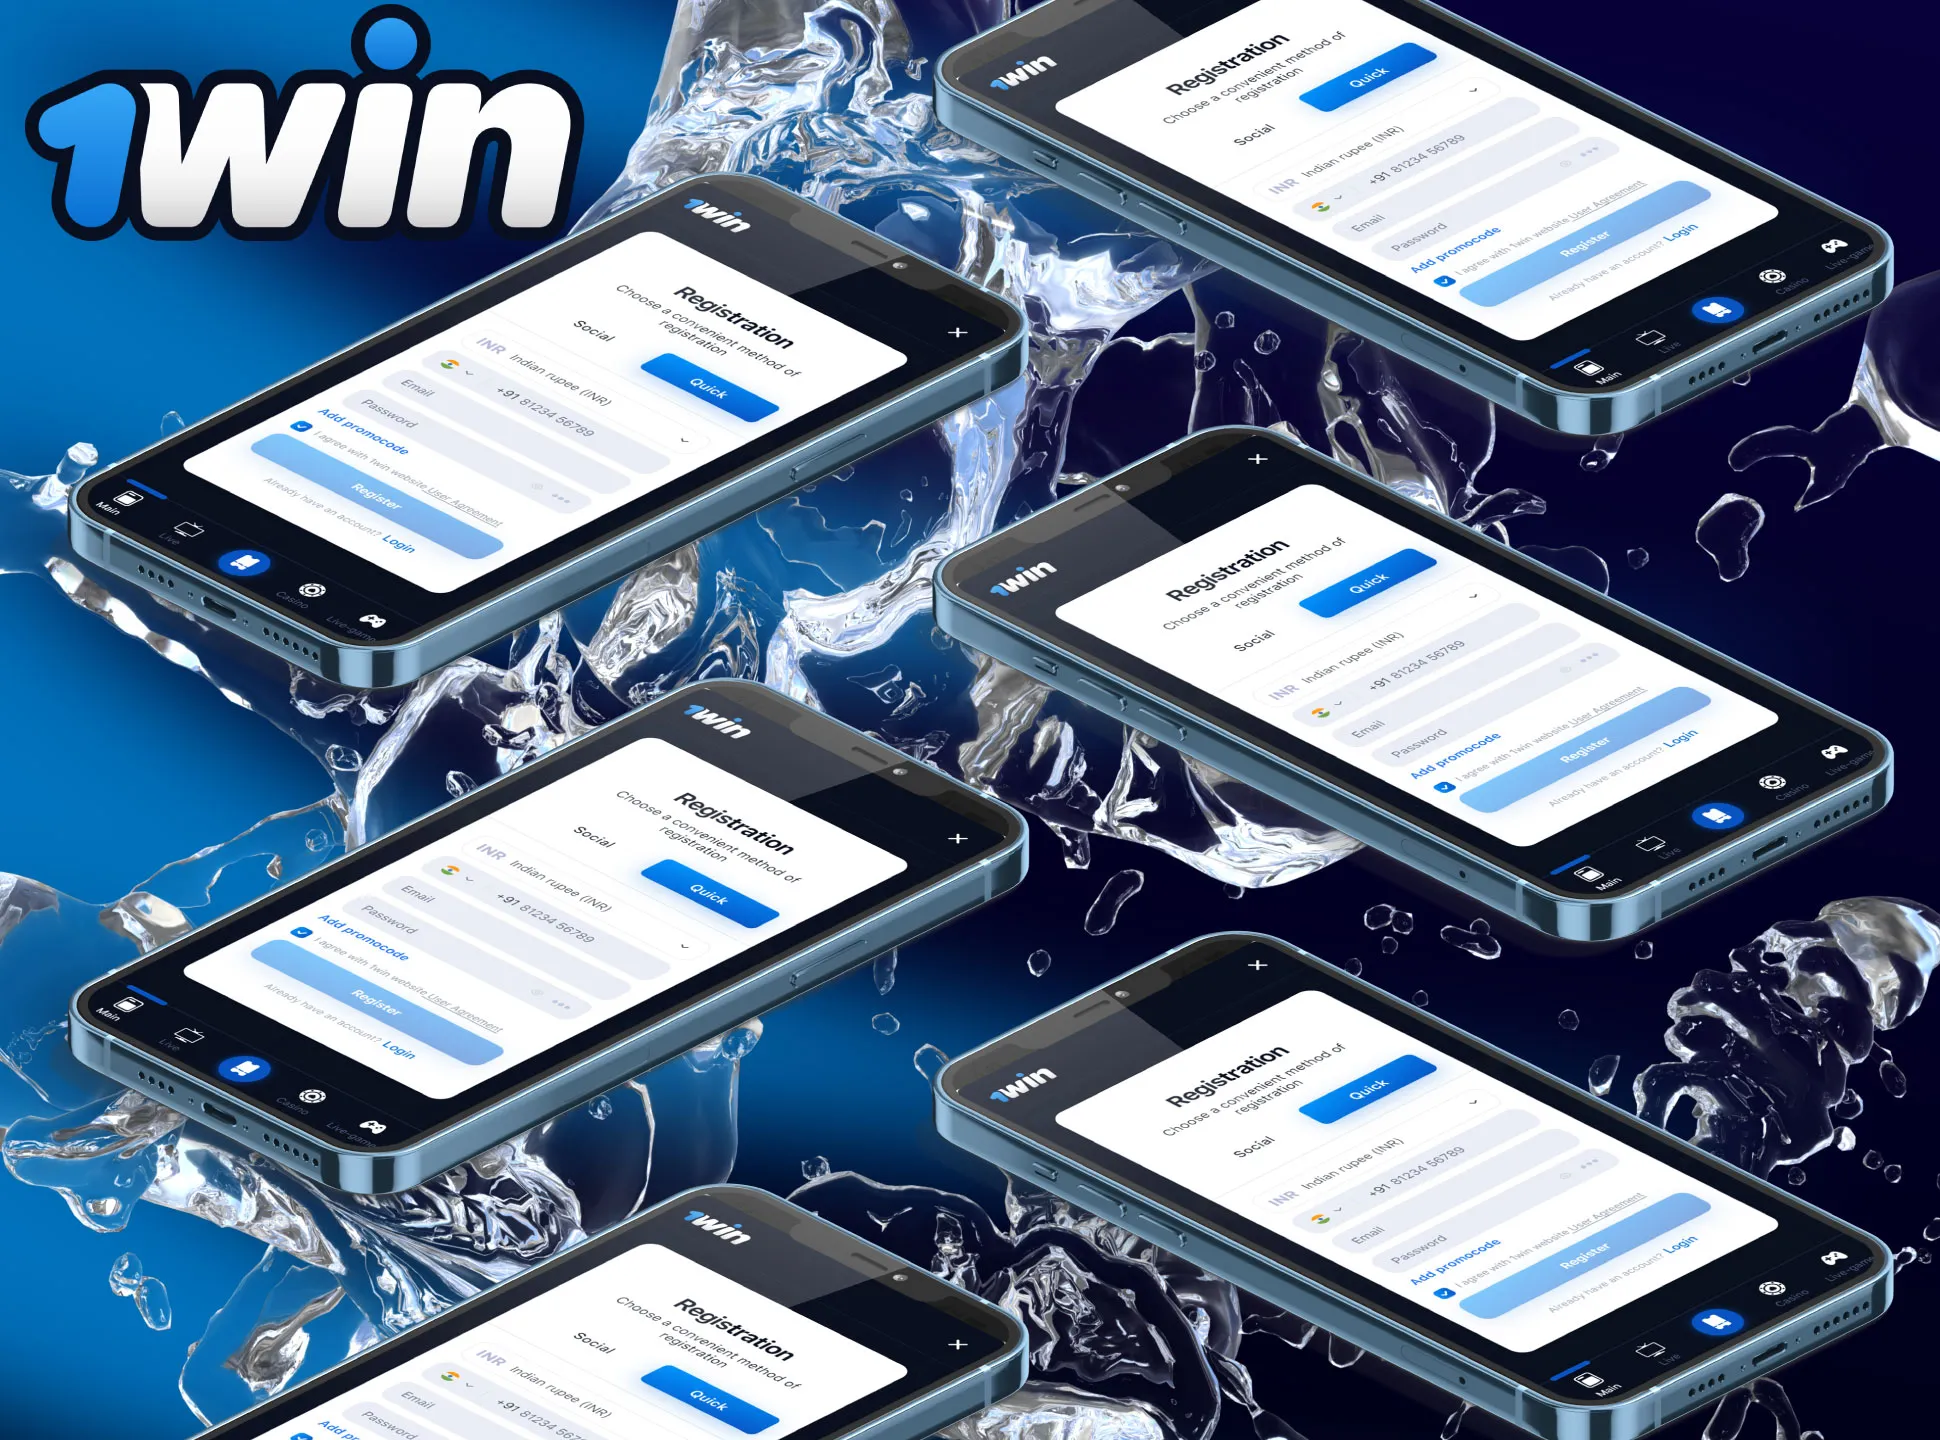 You can register the 1win account in its mobile app.